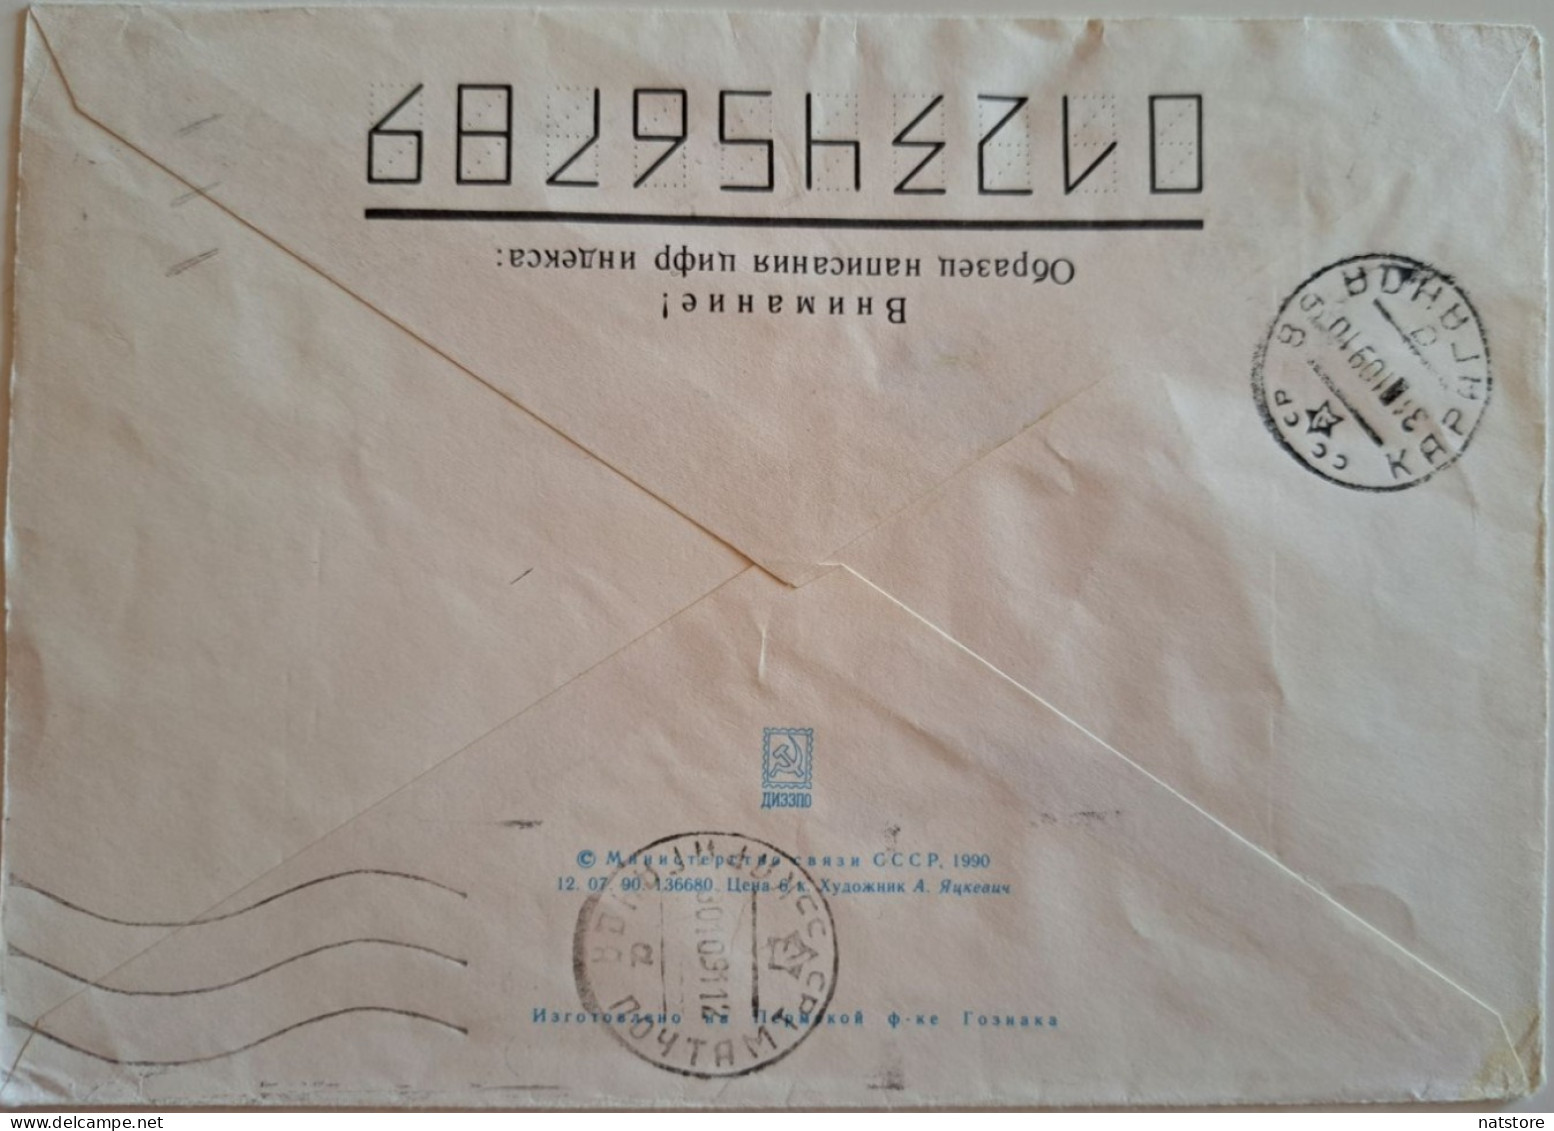 1990..USSR..COVER  WITH STAMP..PAST MAIL..PAR AVION..FIRST ENTRY OF EUROPEANS TO THE SEA OF OKHOTSK - Polarforscher & Promis